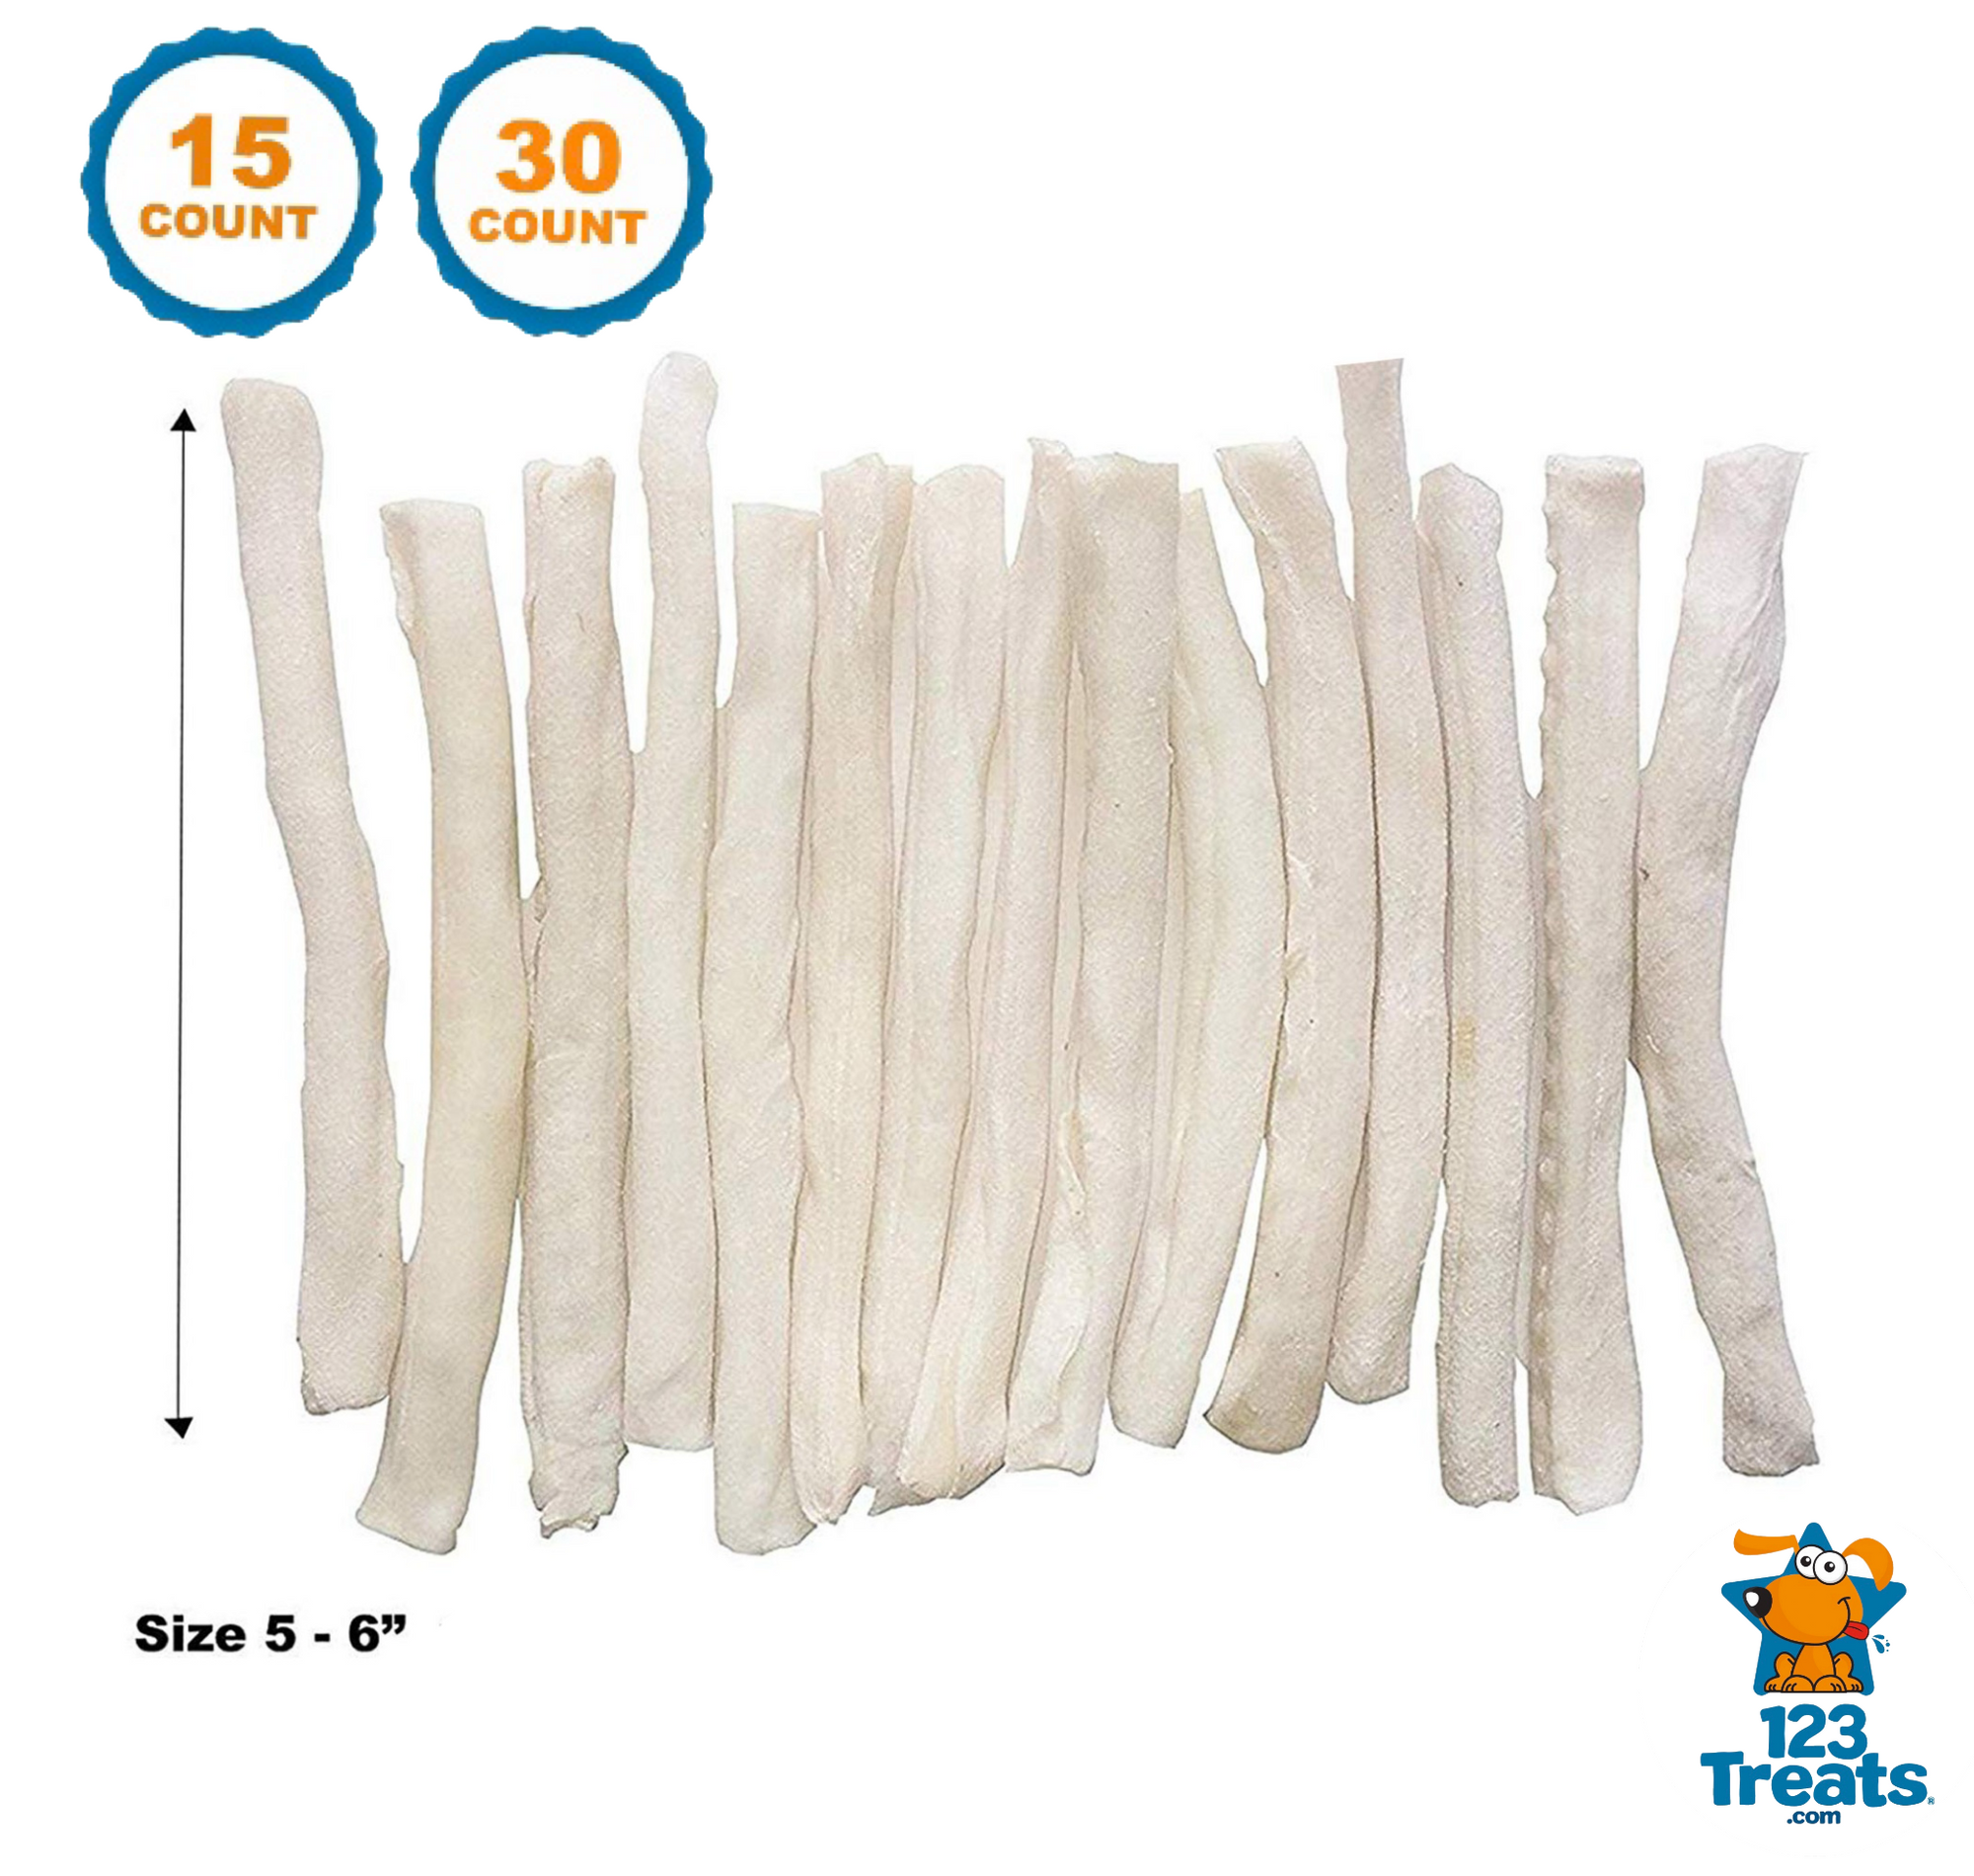 5-6" Rawhide Sticks For Dogs (15 or 30 Count) Delicious Beef Hide Skinny Rolls